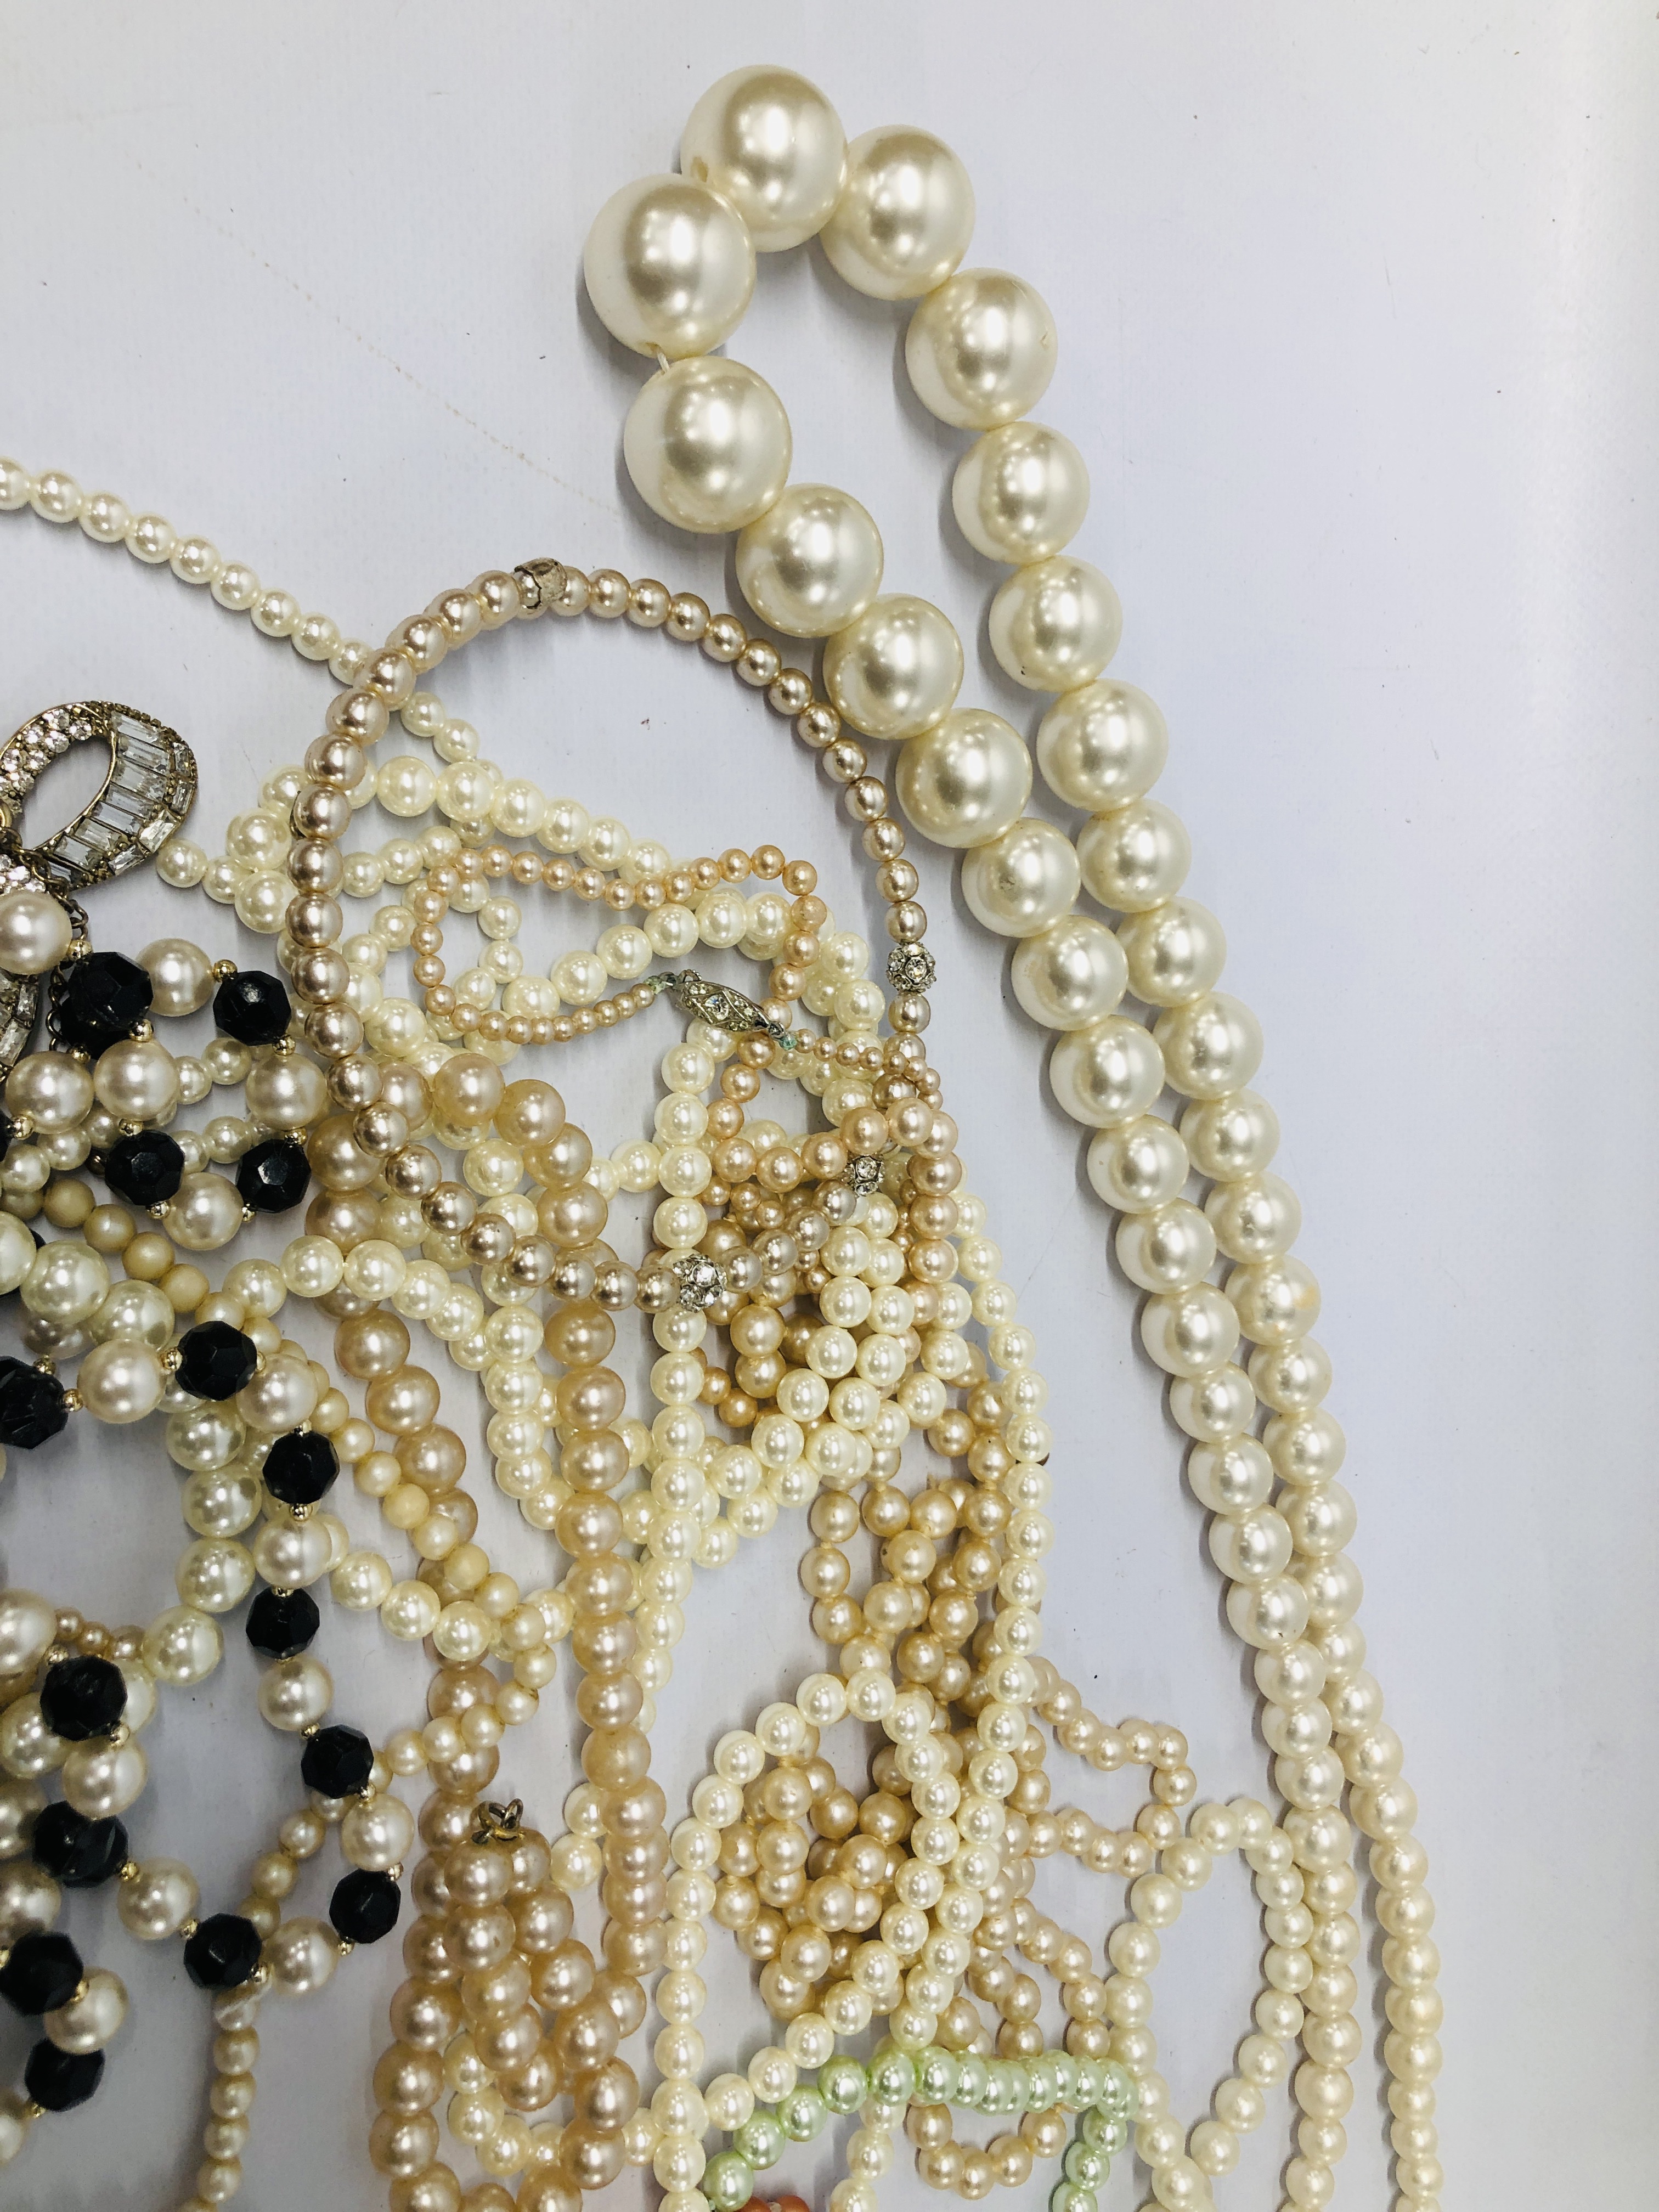 COLLECTION OF DESIGNER COSTUME SIMULATED PEARL NECKLACES. - Image 2 of 4